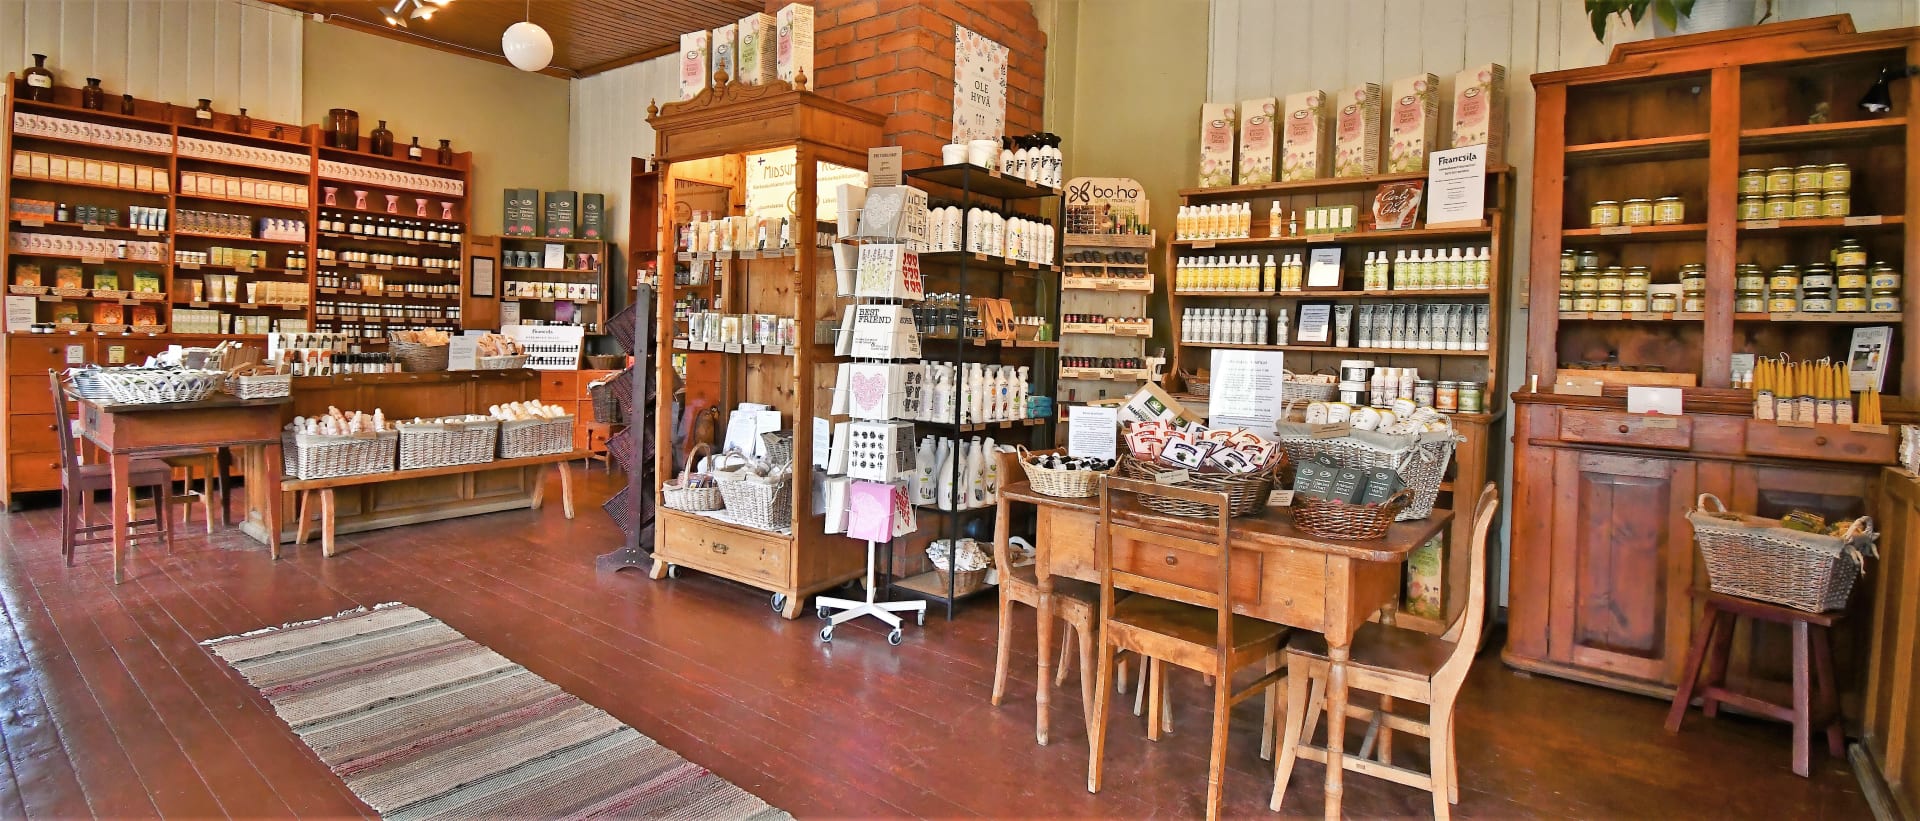 The café also includes a sundries shop, where you can buy various local produce, as well as all your favorite Frantsila products.